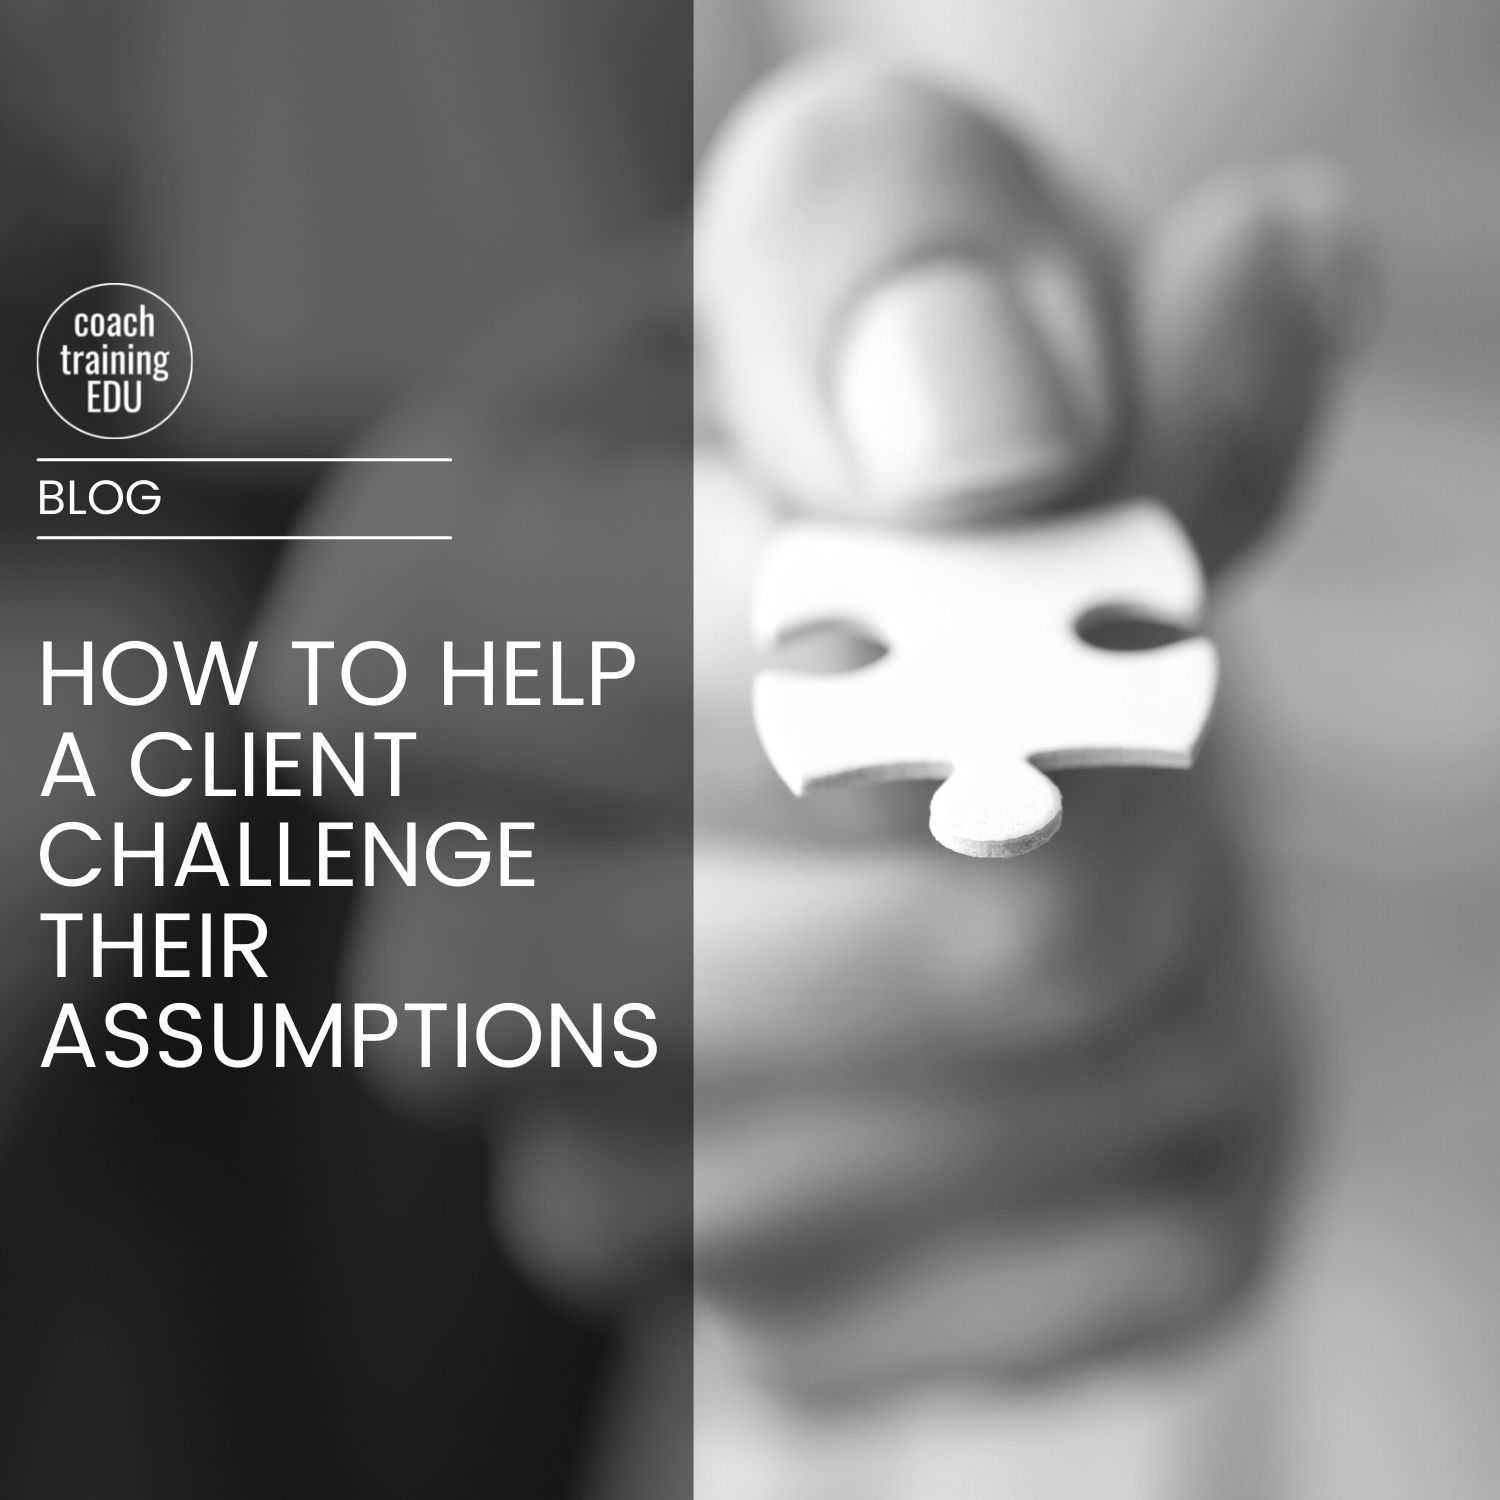 How to Help a Client Challenge Their Assumptions